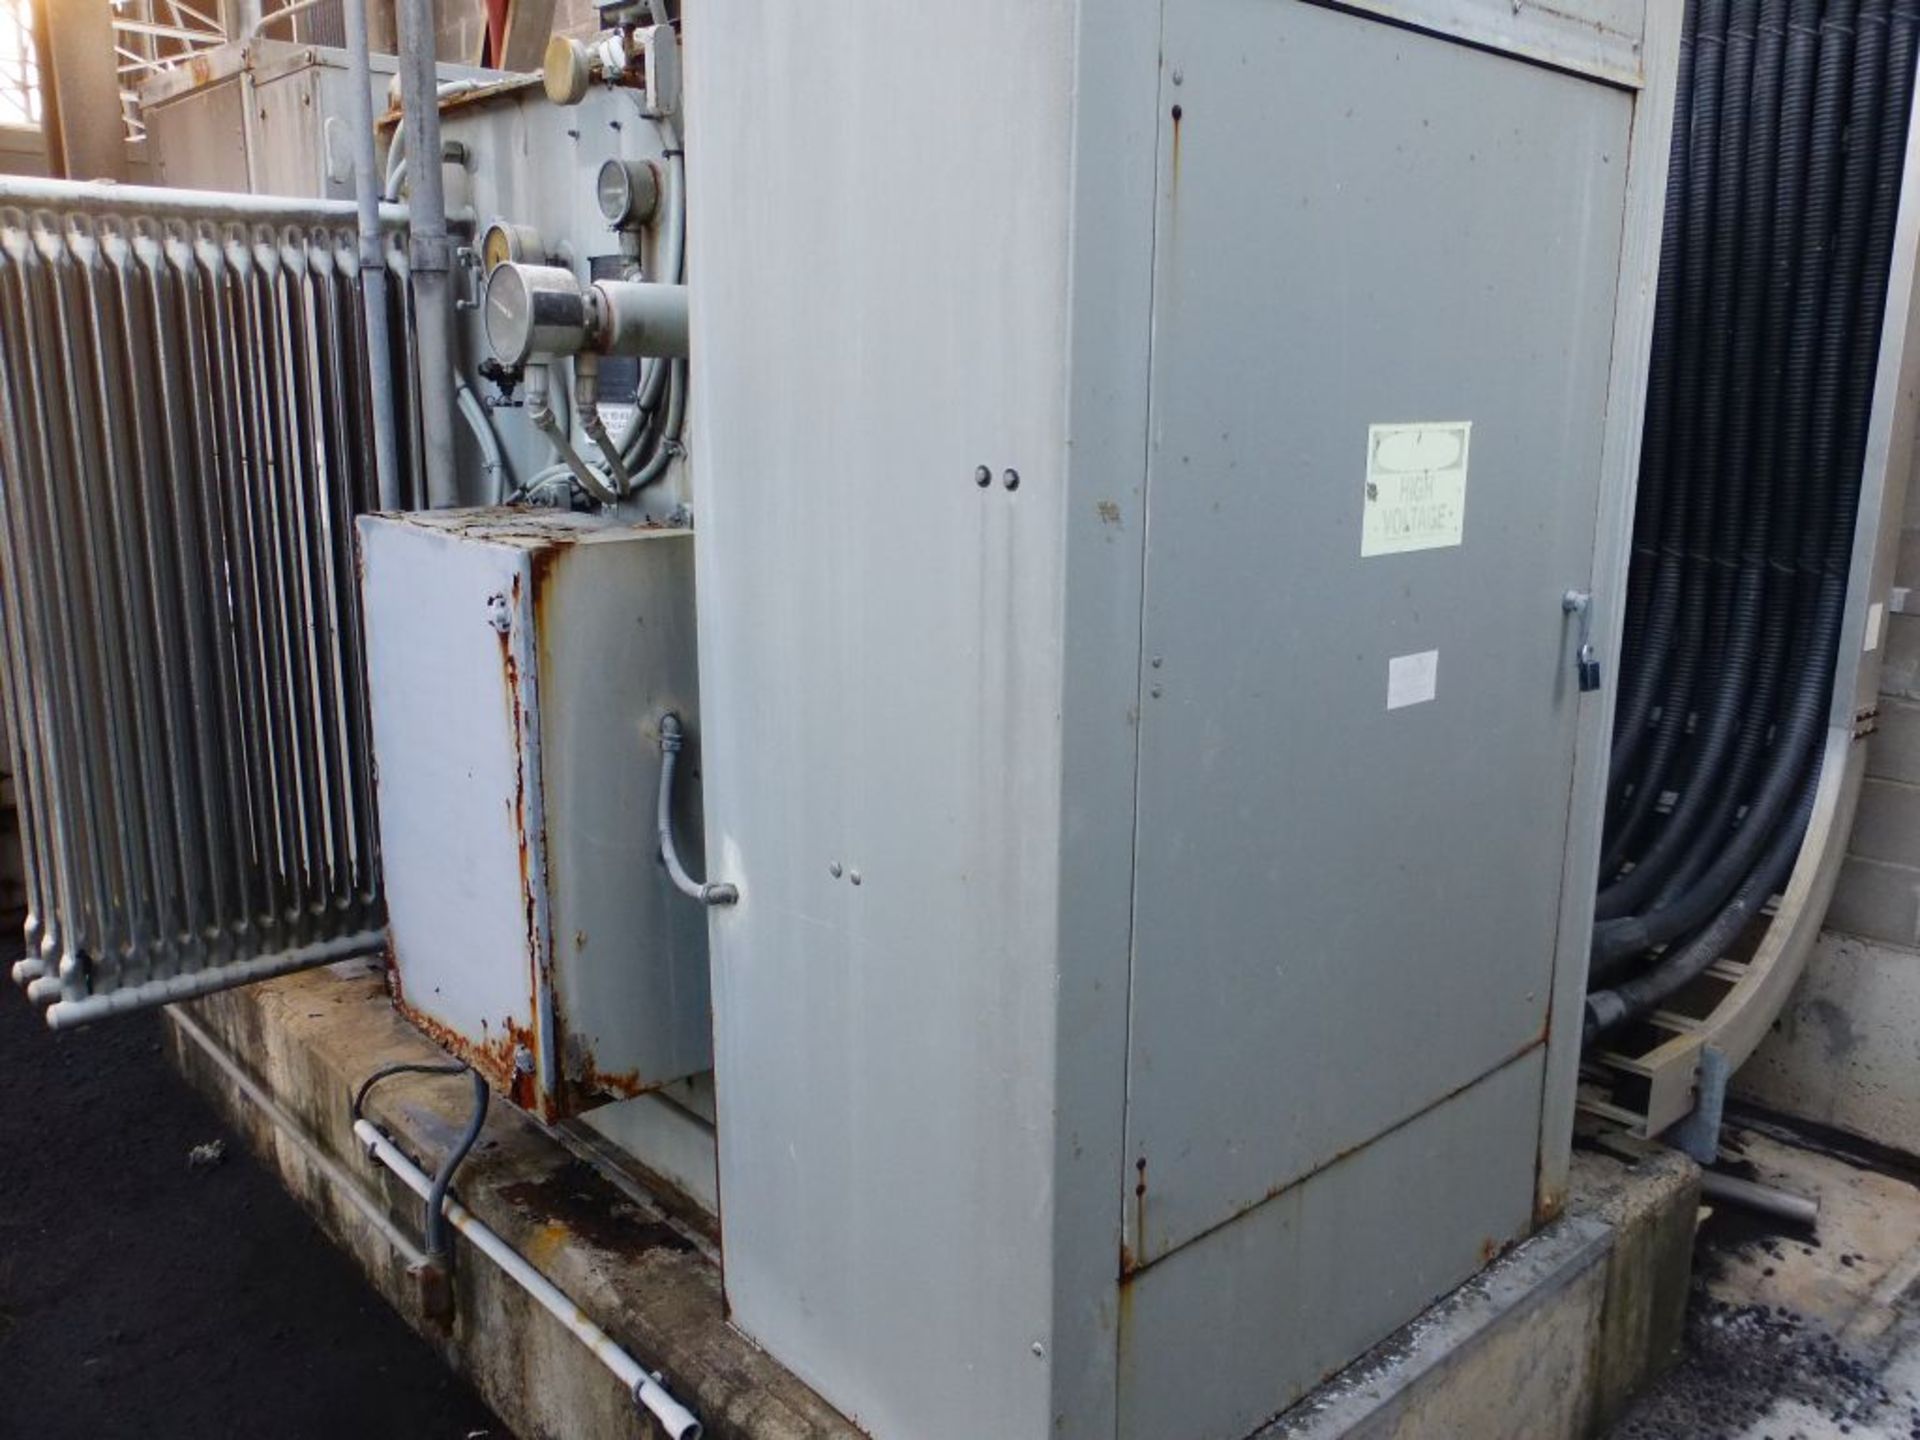 2006 Siemens Transformer w/Siemens Switch - Removed from Service January 2022 | Transformer: 2500/ - Image 3 of 11